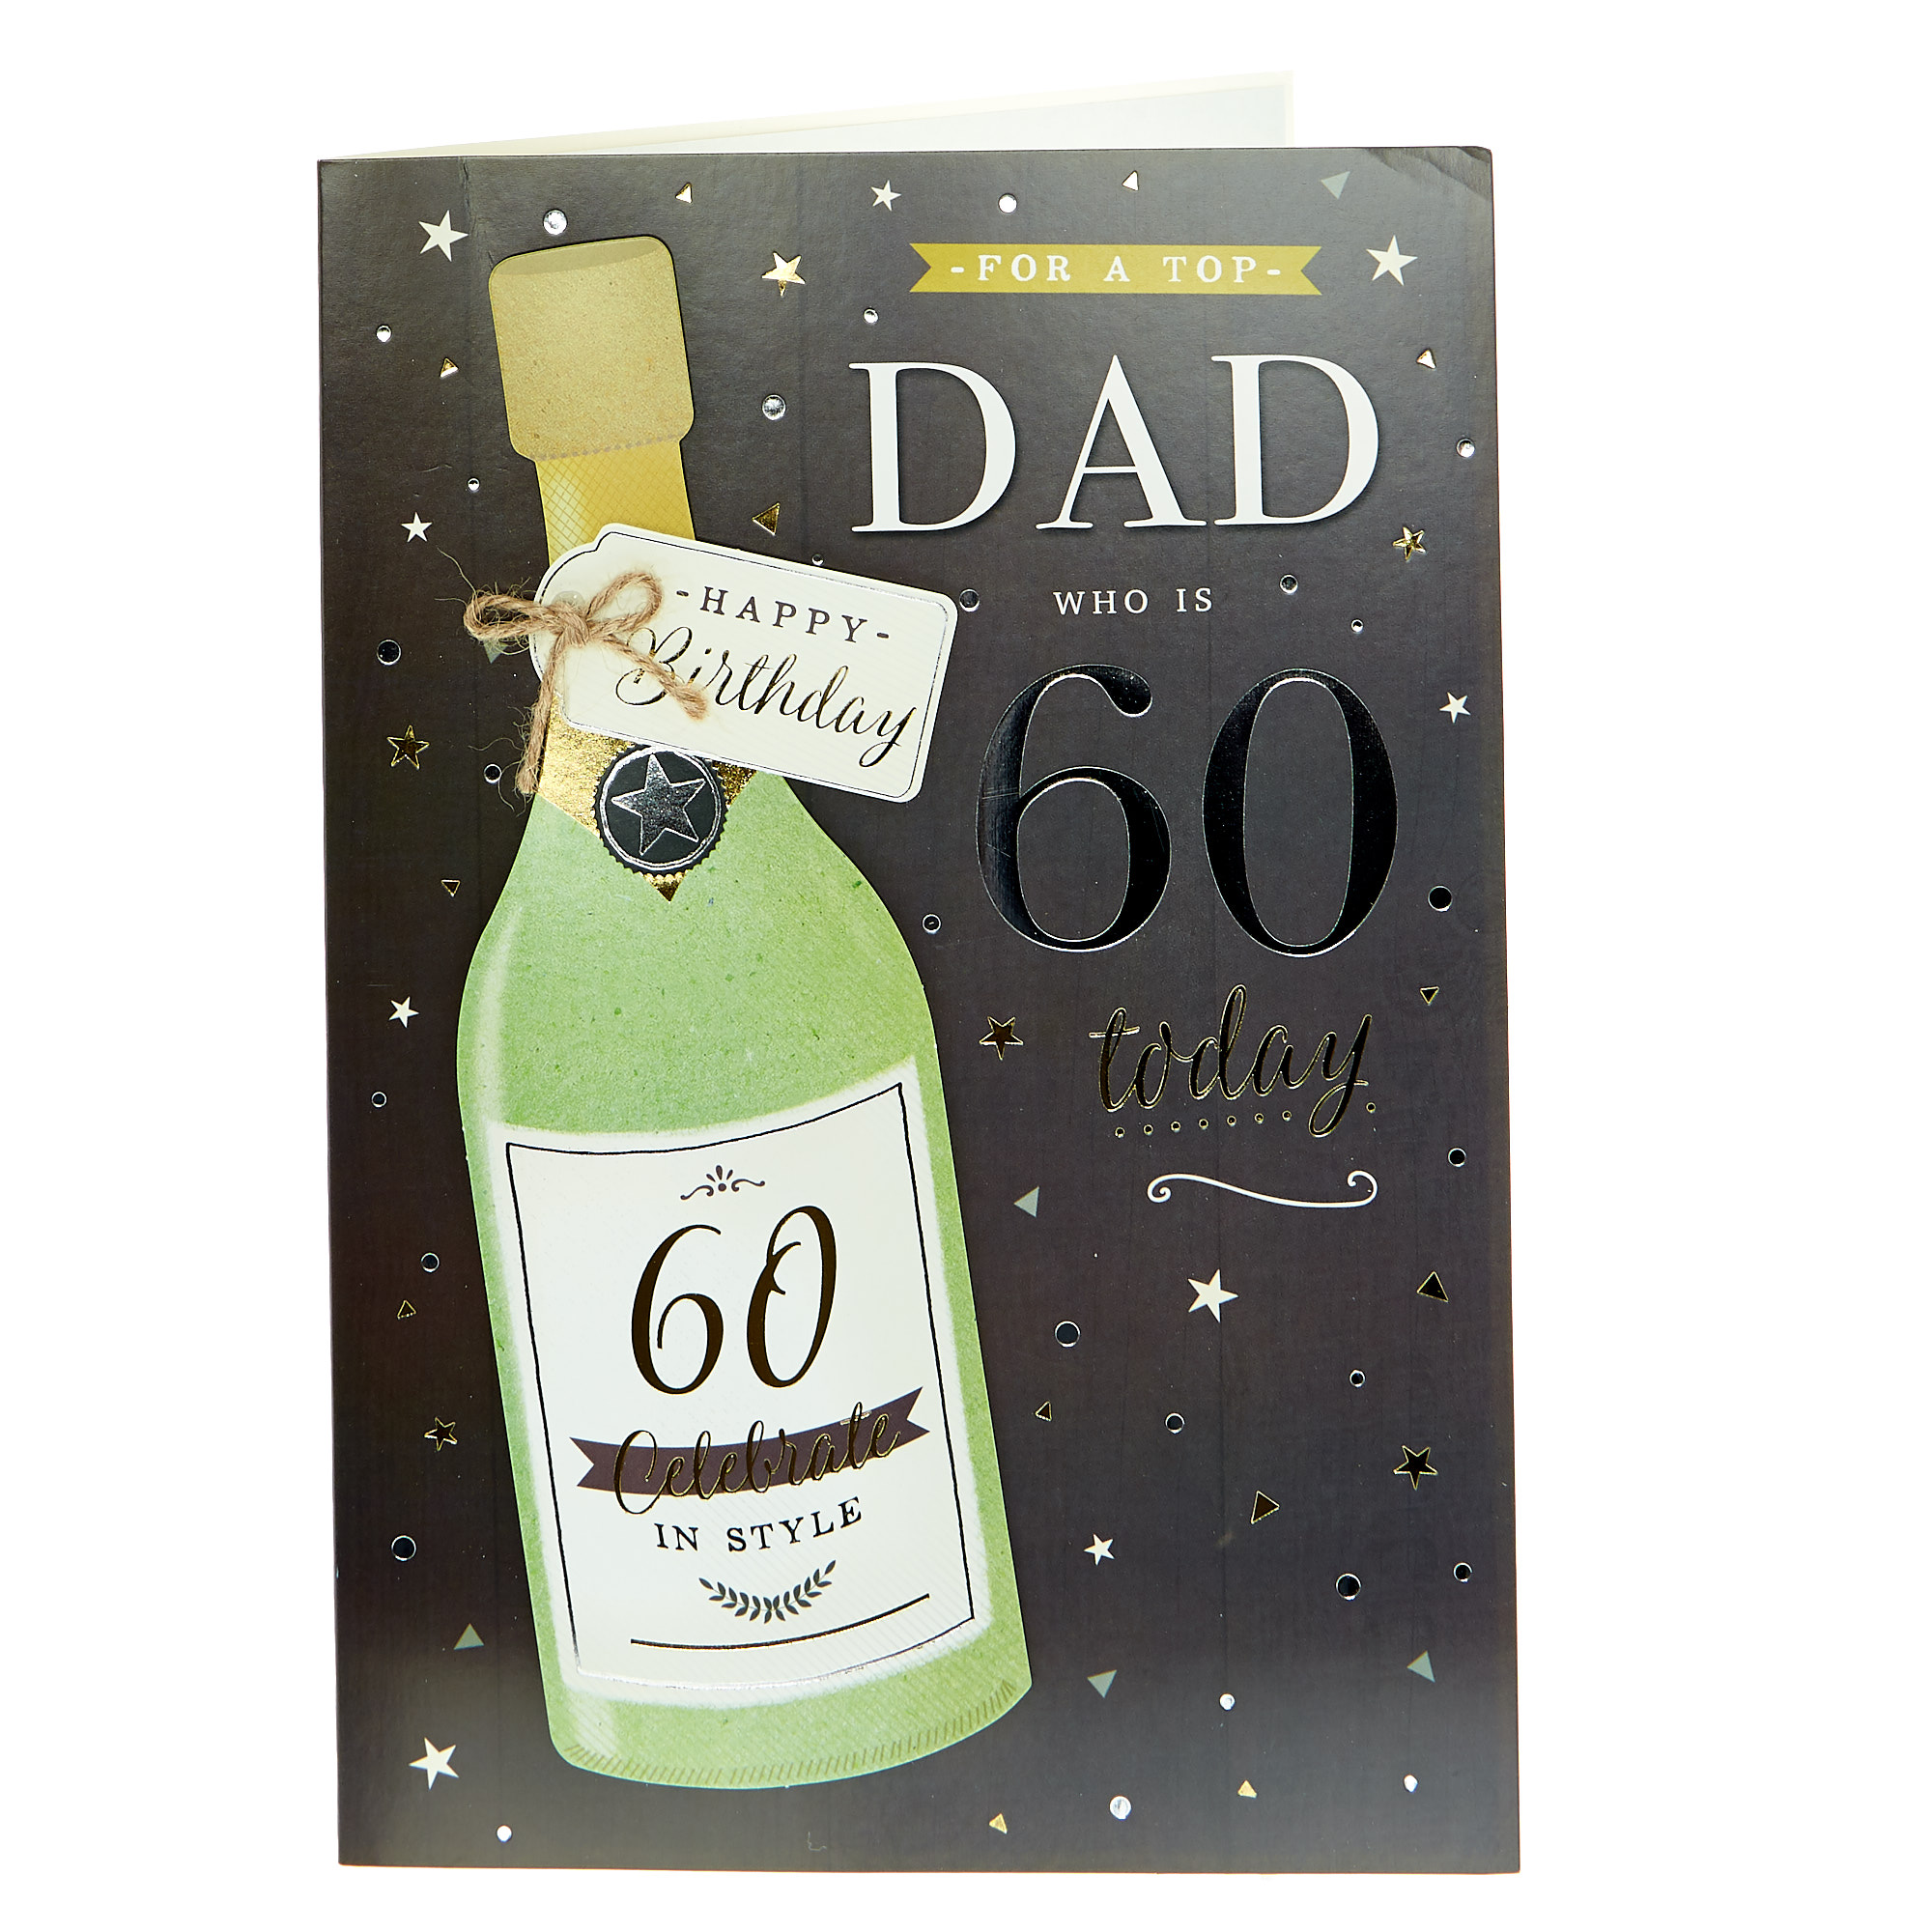 60th Birthday Card - For A Top Dad